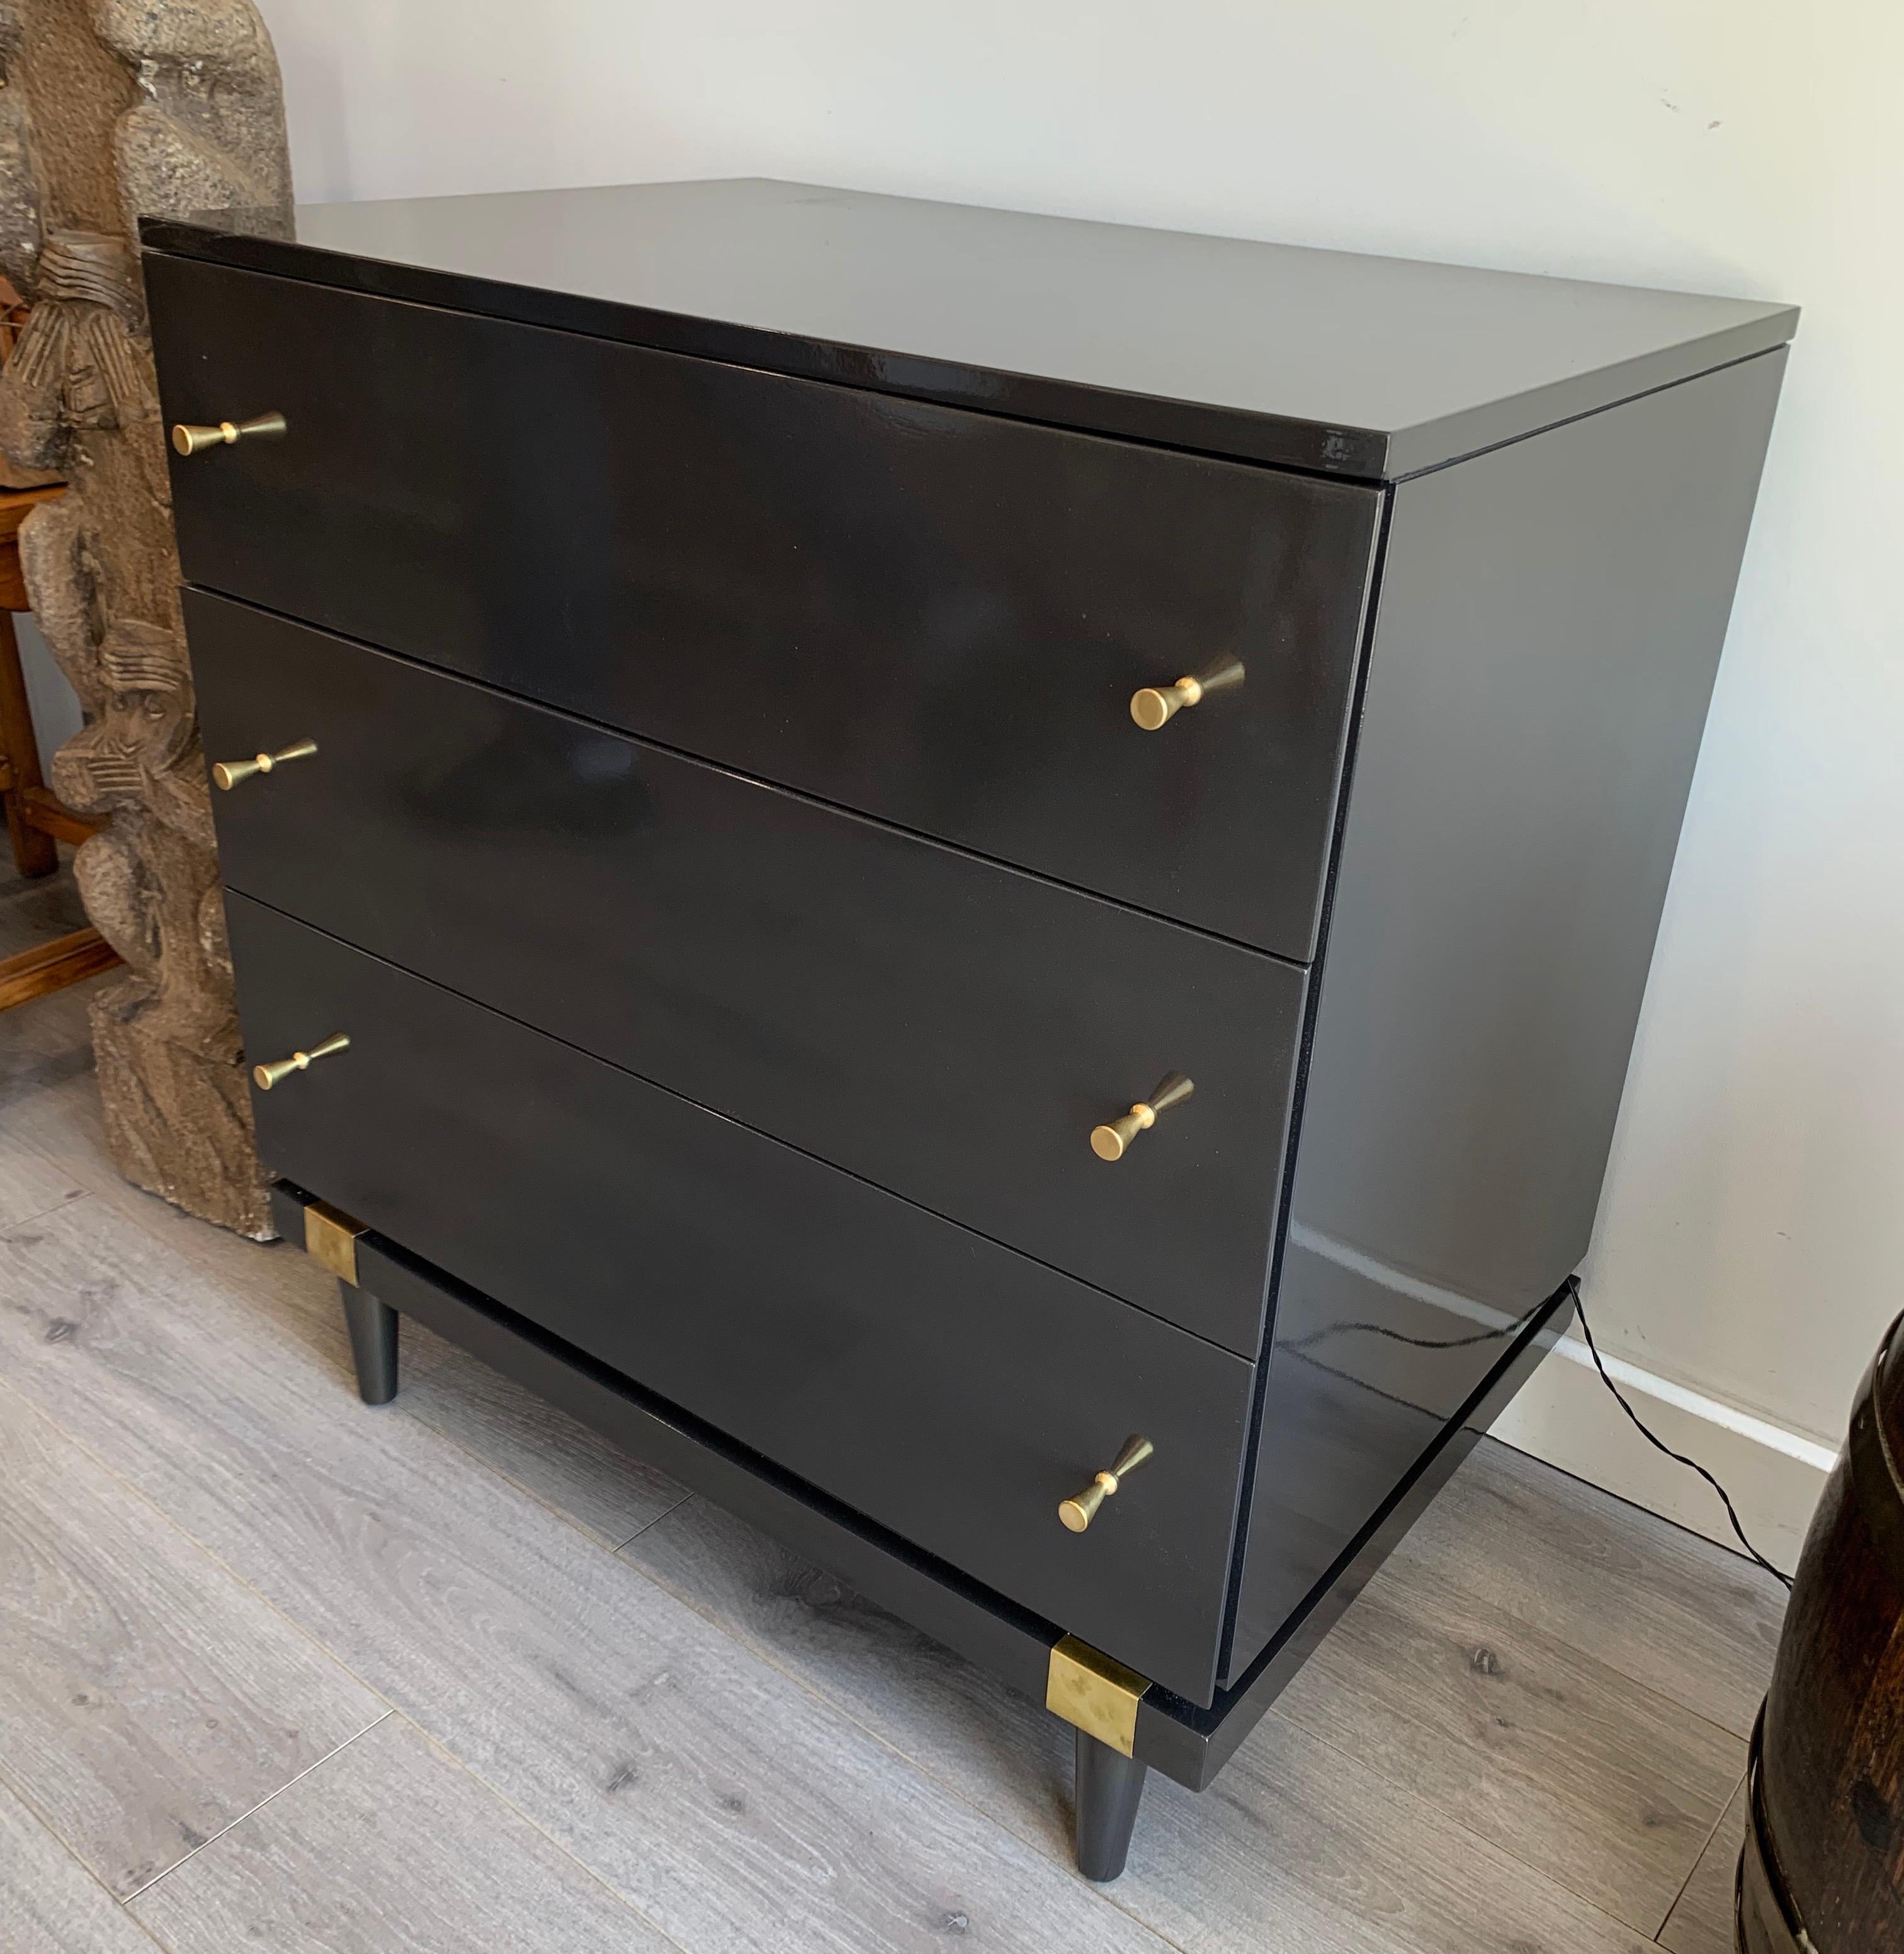 Newly refurbished signed Kroehler midcentury three-drawer commode/chest of drawers. The color is
an unusual dark gray.